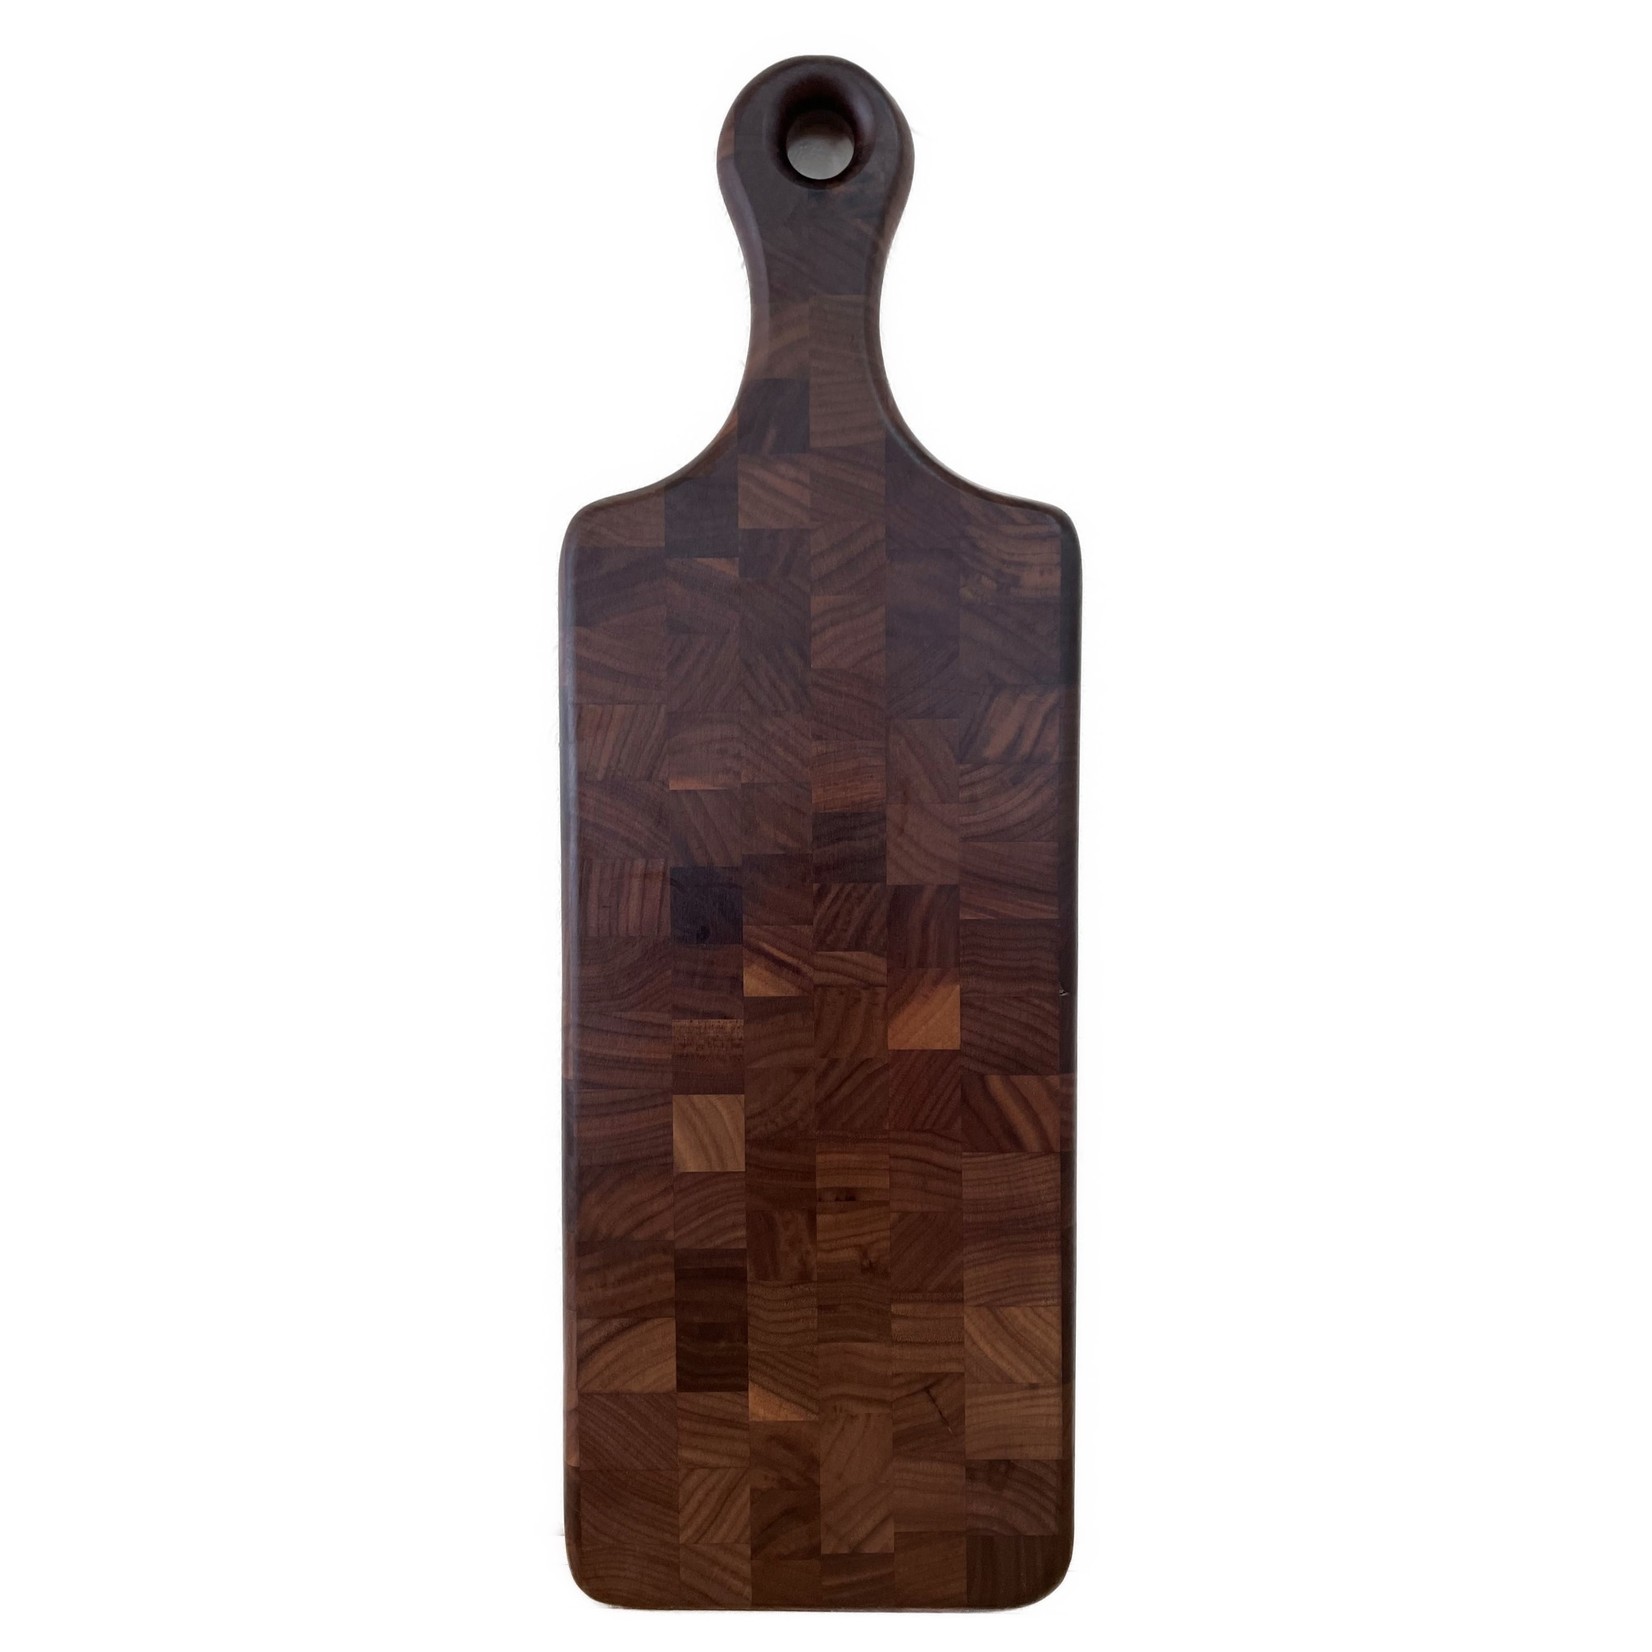 Wood Cutting Board with Handle